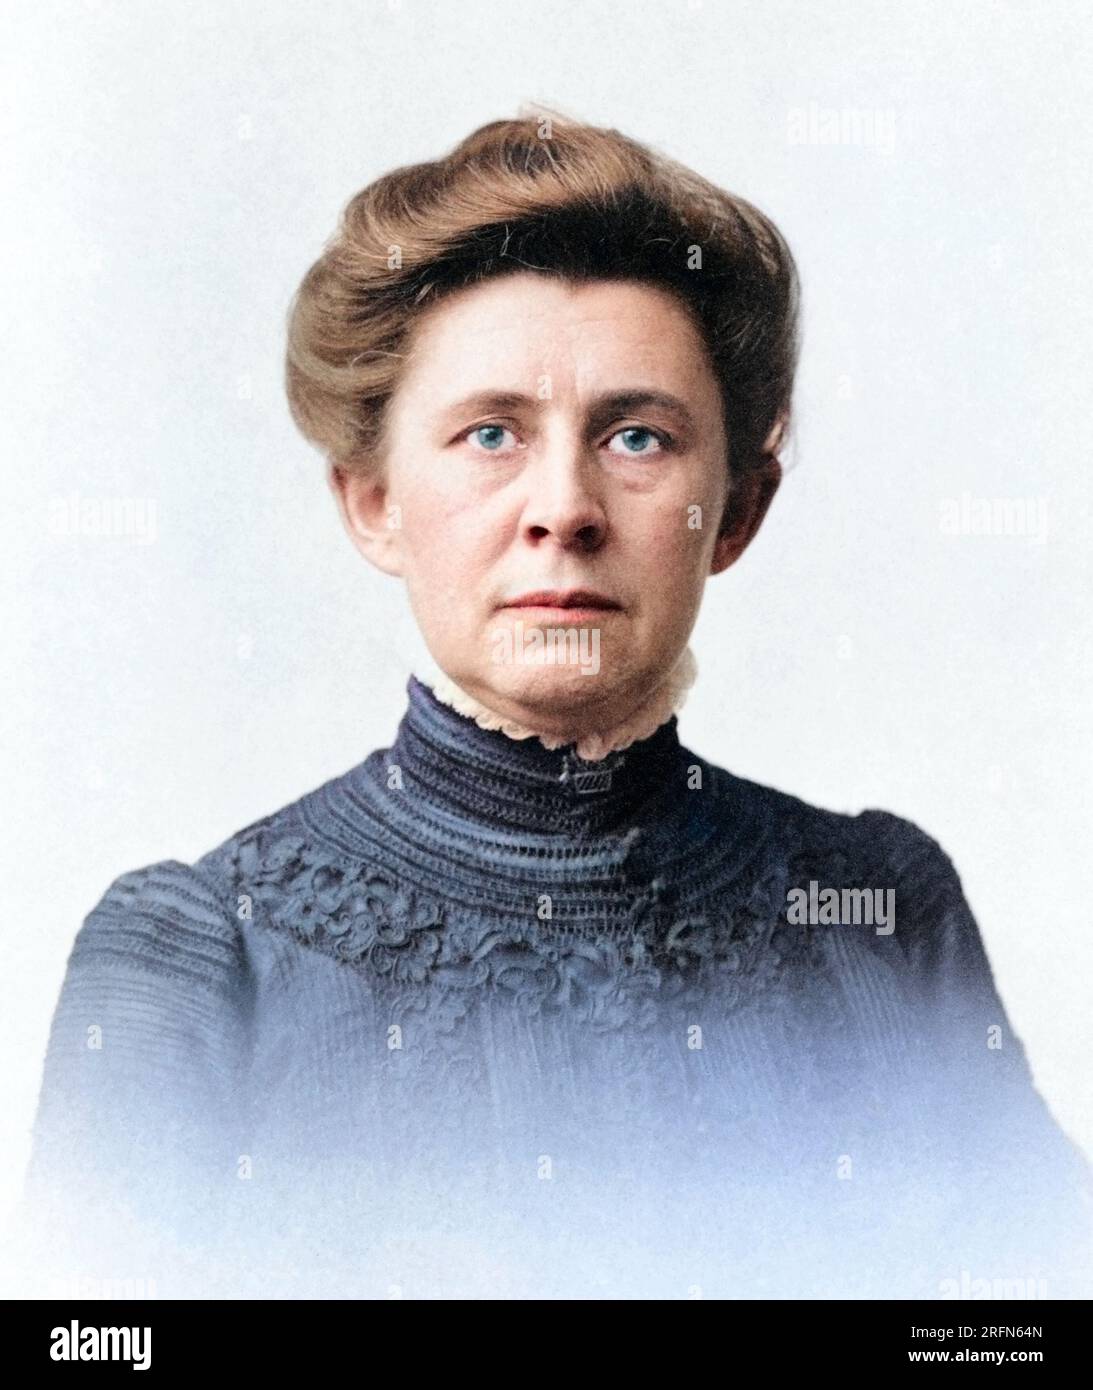 Ida Tarbell (1857-1944) was an American writer and pioneer of investigative journalism, best known for her 1904 book The History of the Standard Oil Company, a work that contributed to the dissolution of the Standard Oil monopoly and helped usher in the Hepburn Act of 1906, the Mann-Elkins Act, the creation of the Federal Trade Commission (FTC), and passage of the Clayton Antitrust Act. Photo, c. 1904 by James E. Purdy. Colorized. Stock Photo